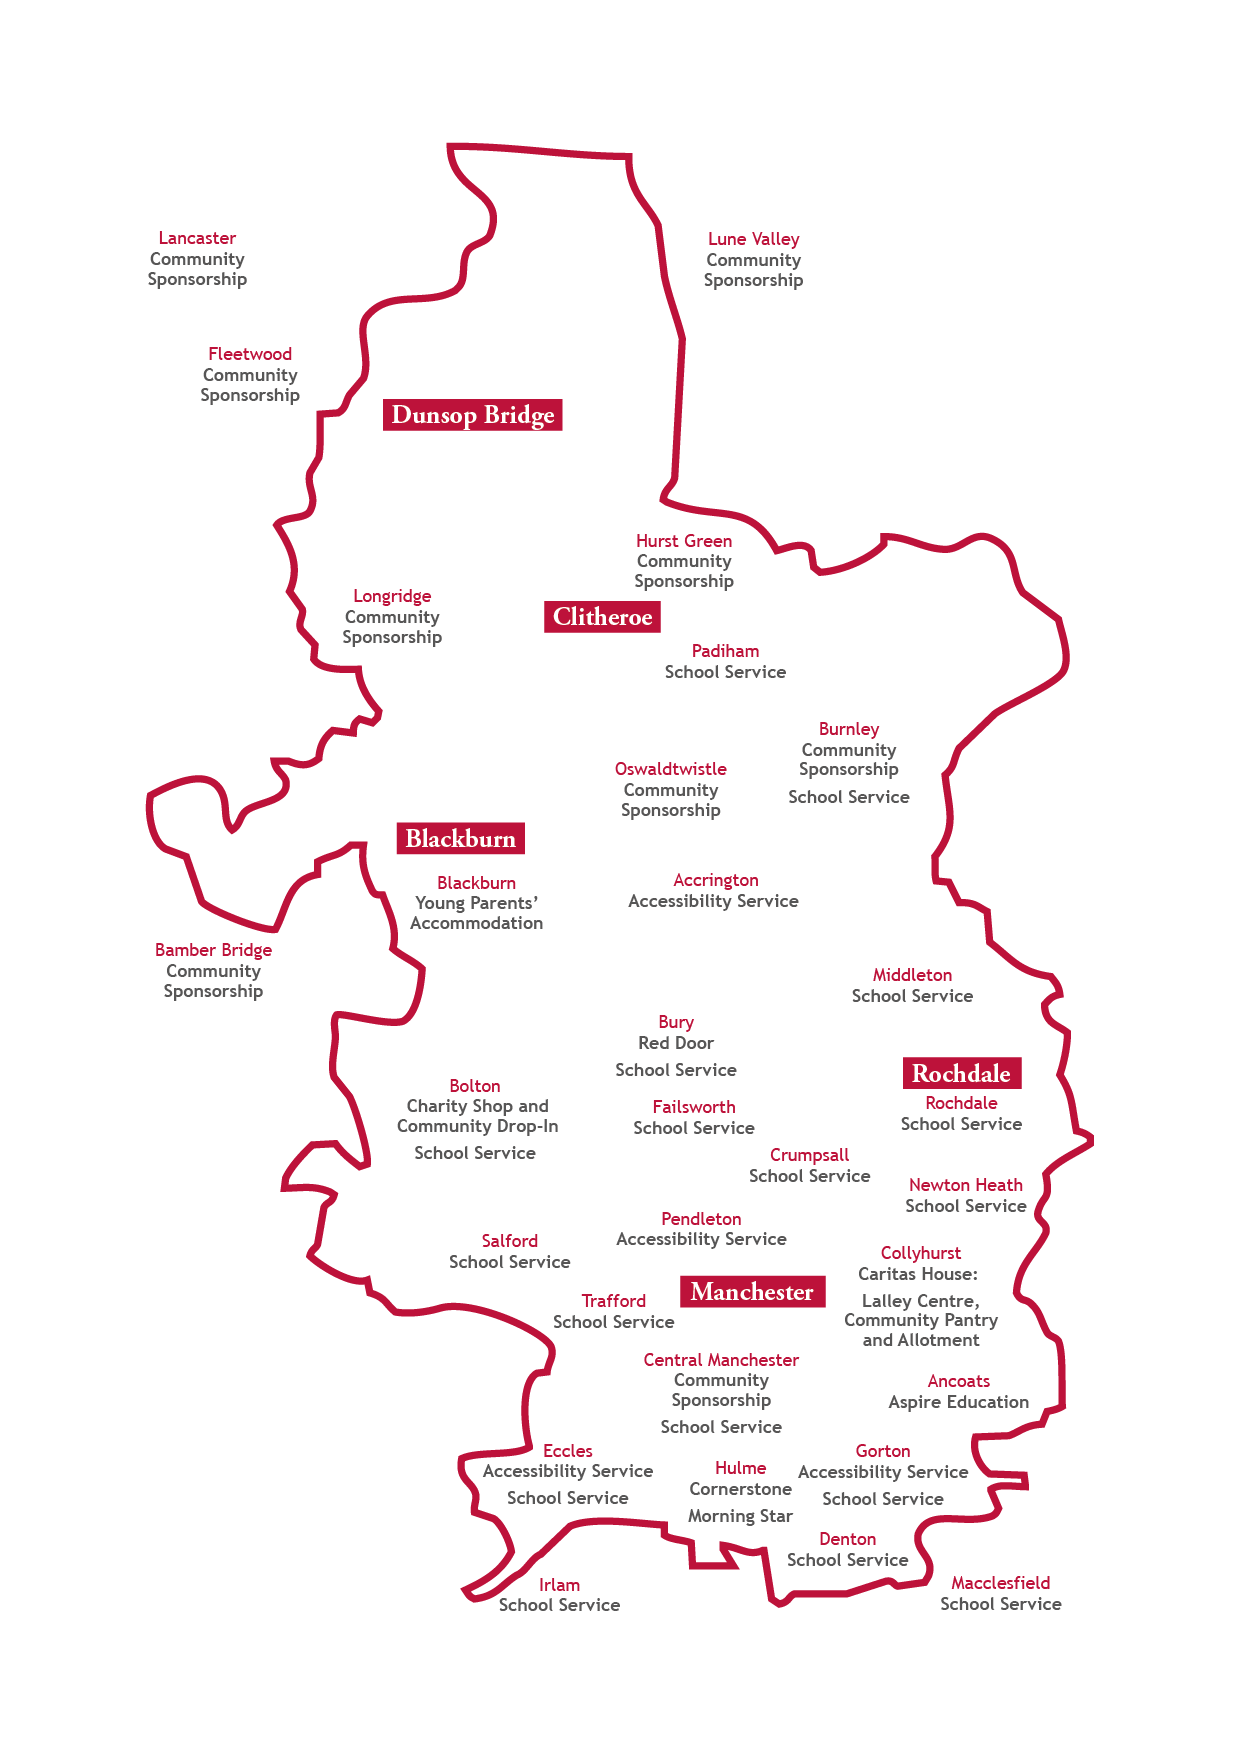 Outline of Greater Manchester and Lancashire locations where Caritas services operate